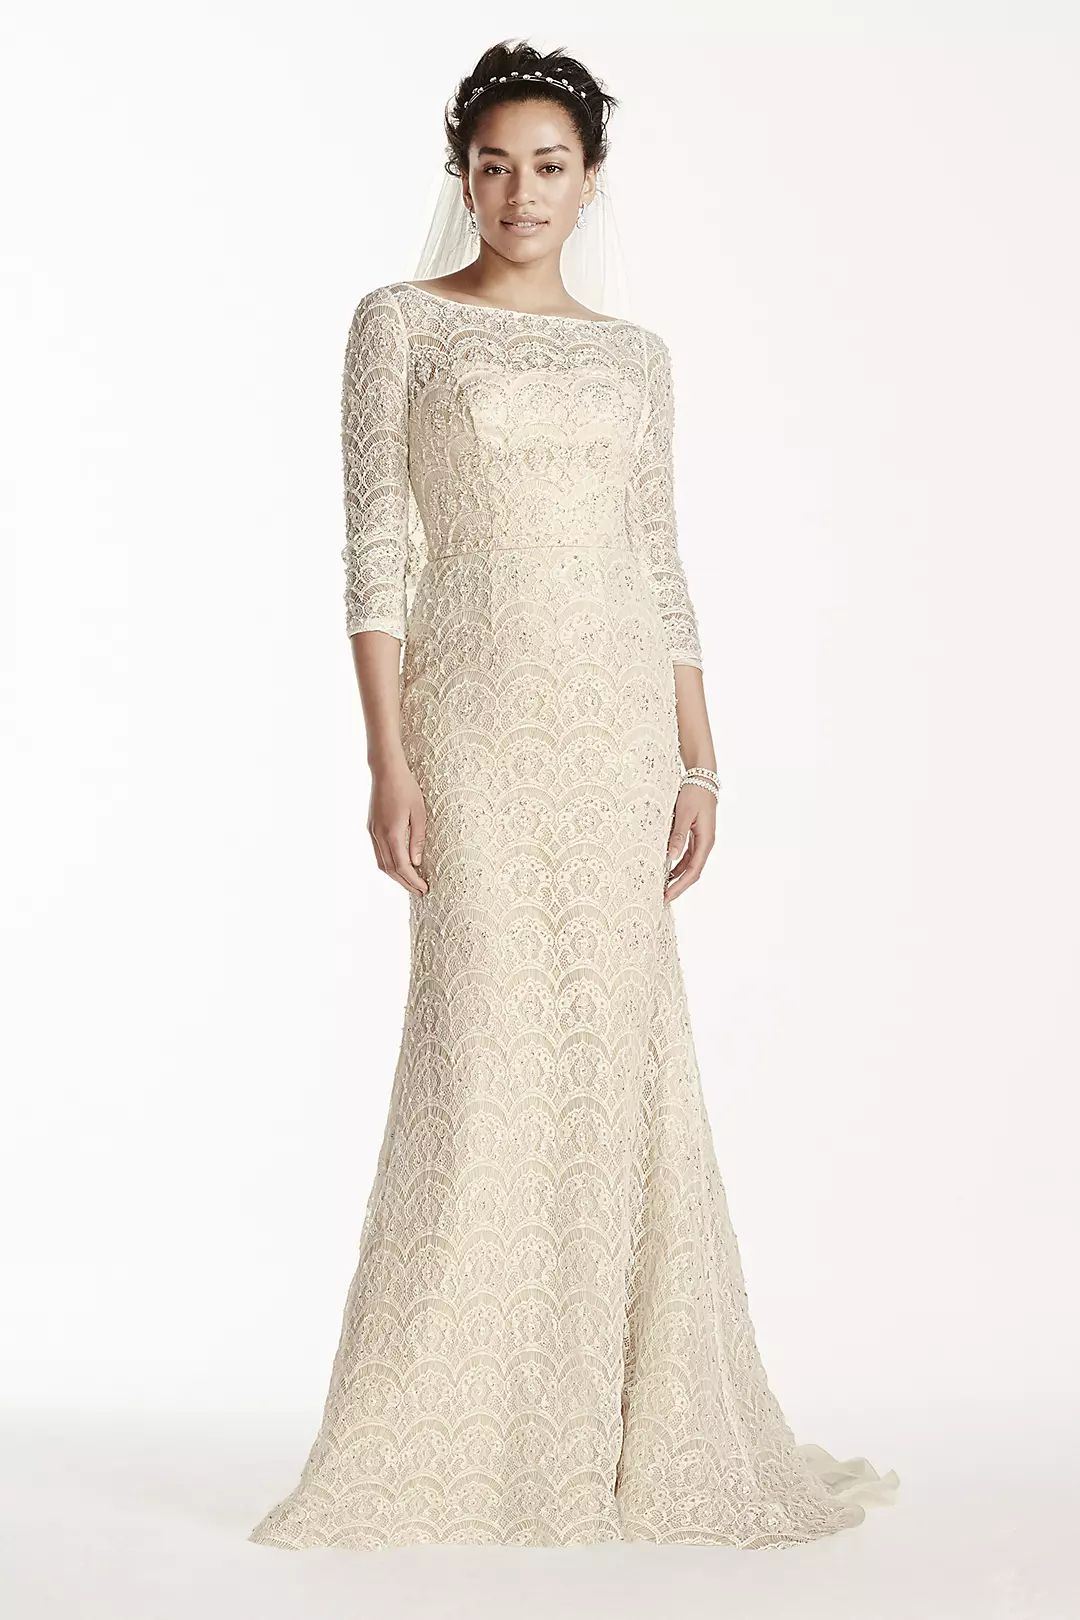 As-Is Petite Beaded Lace 3/4 Sleeved Wedding Dress Image